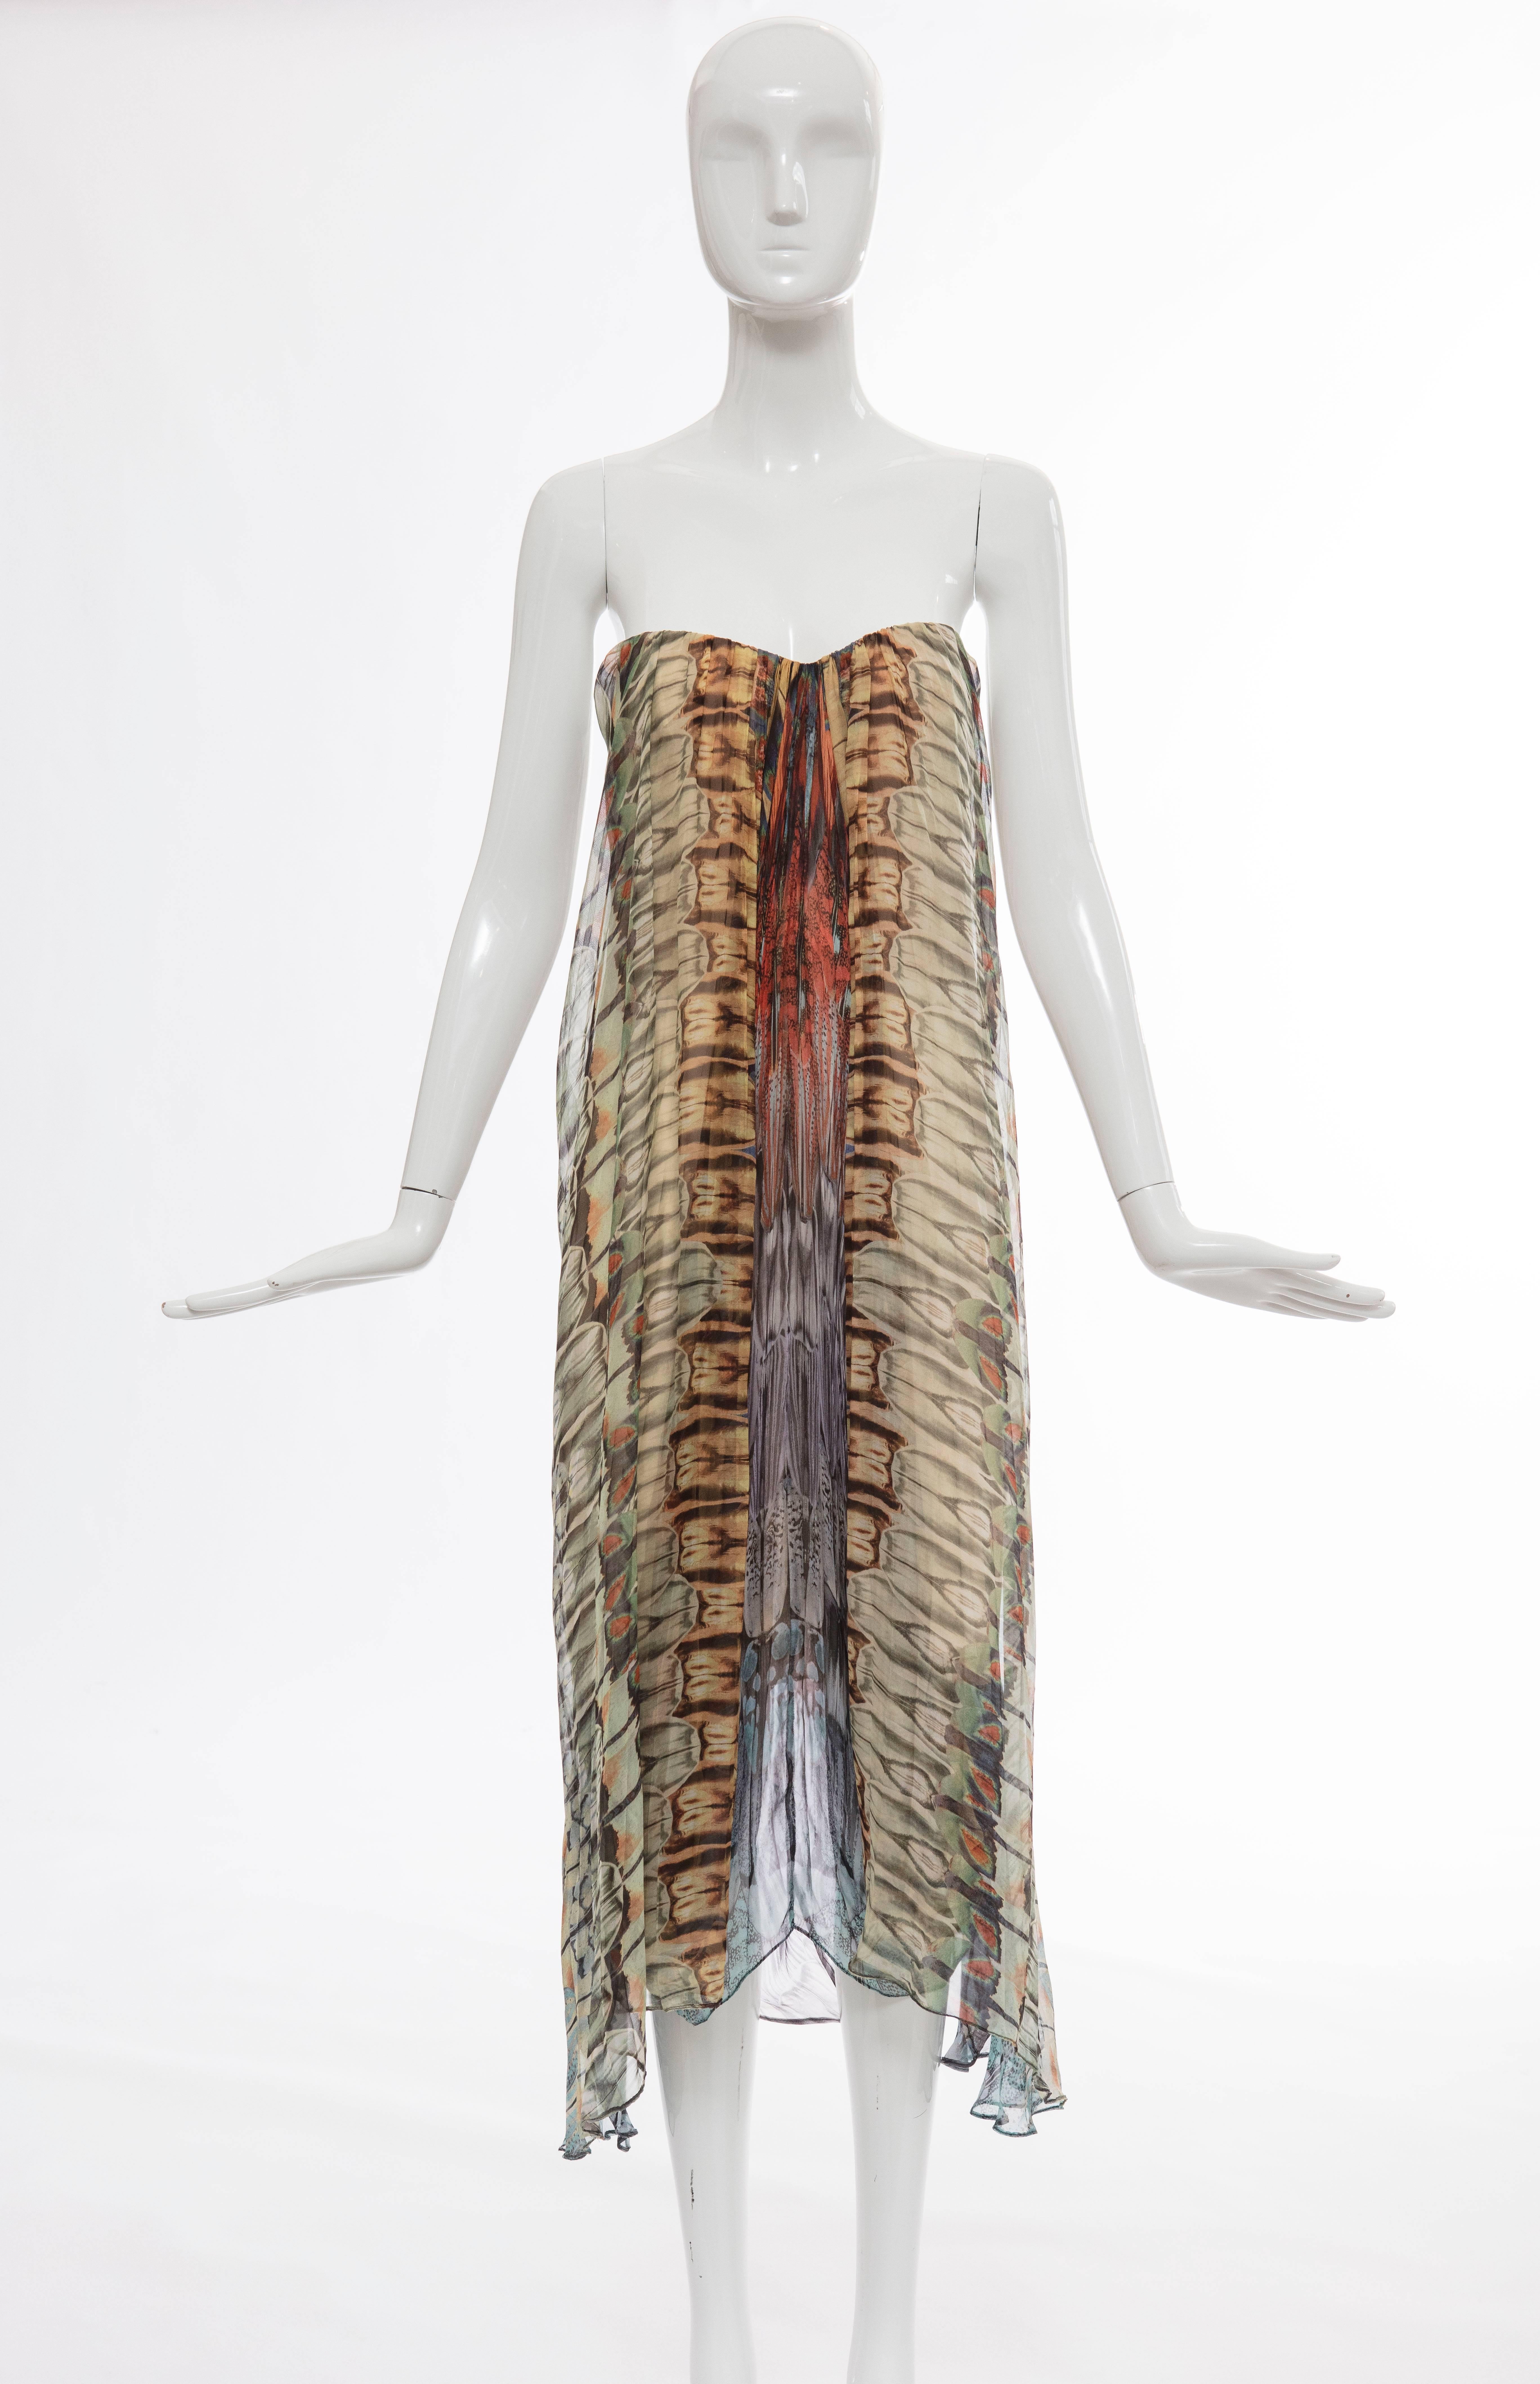 Alexander McQueen, Spring-Summer 2008 butterfly printed silk chiffon strapless evening dress with buit-in brassiere, back zip and lined in silk.

IT. 44
US. 8

Bust 32", Waist 30", Hips 40", Length 40"
